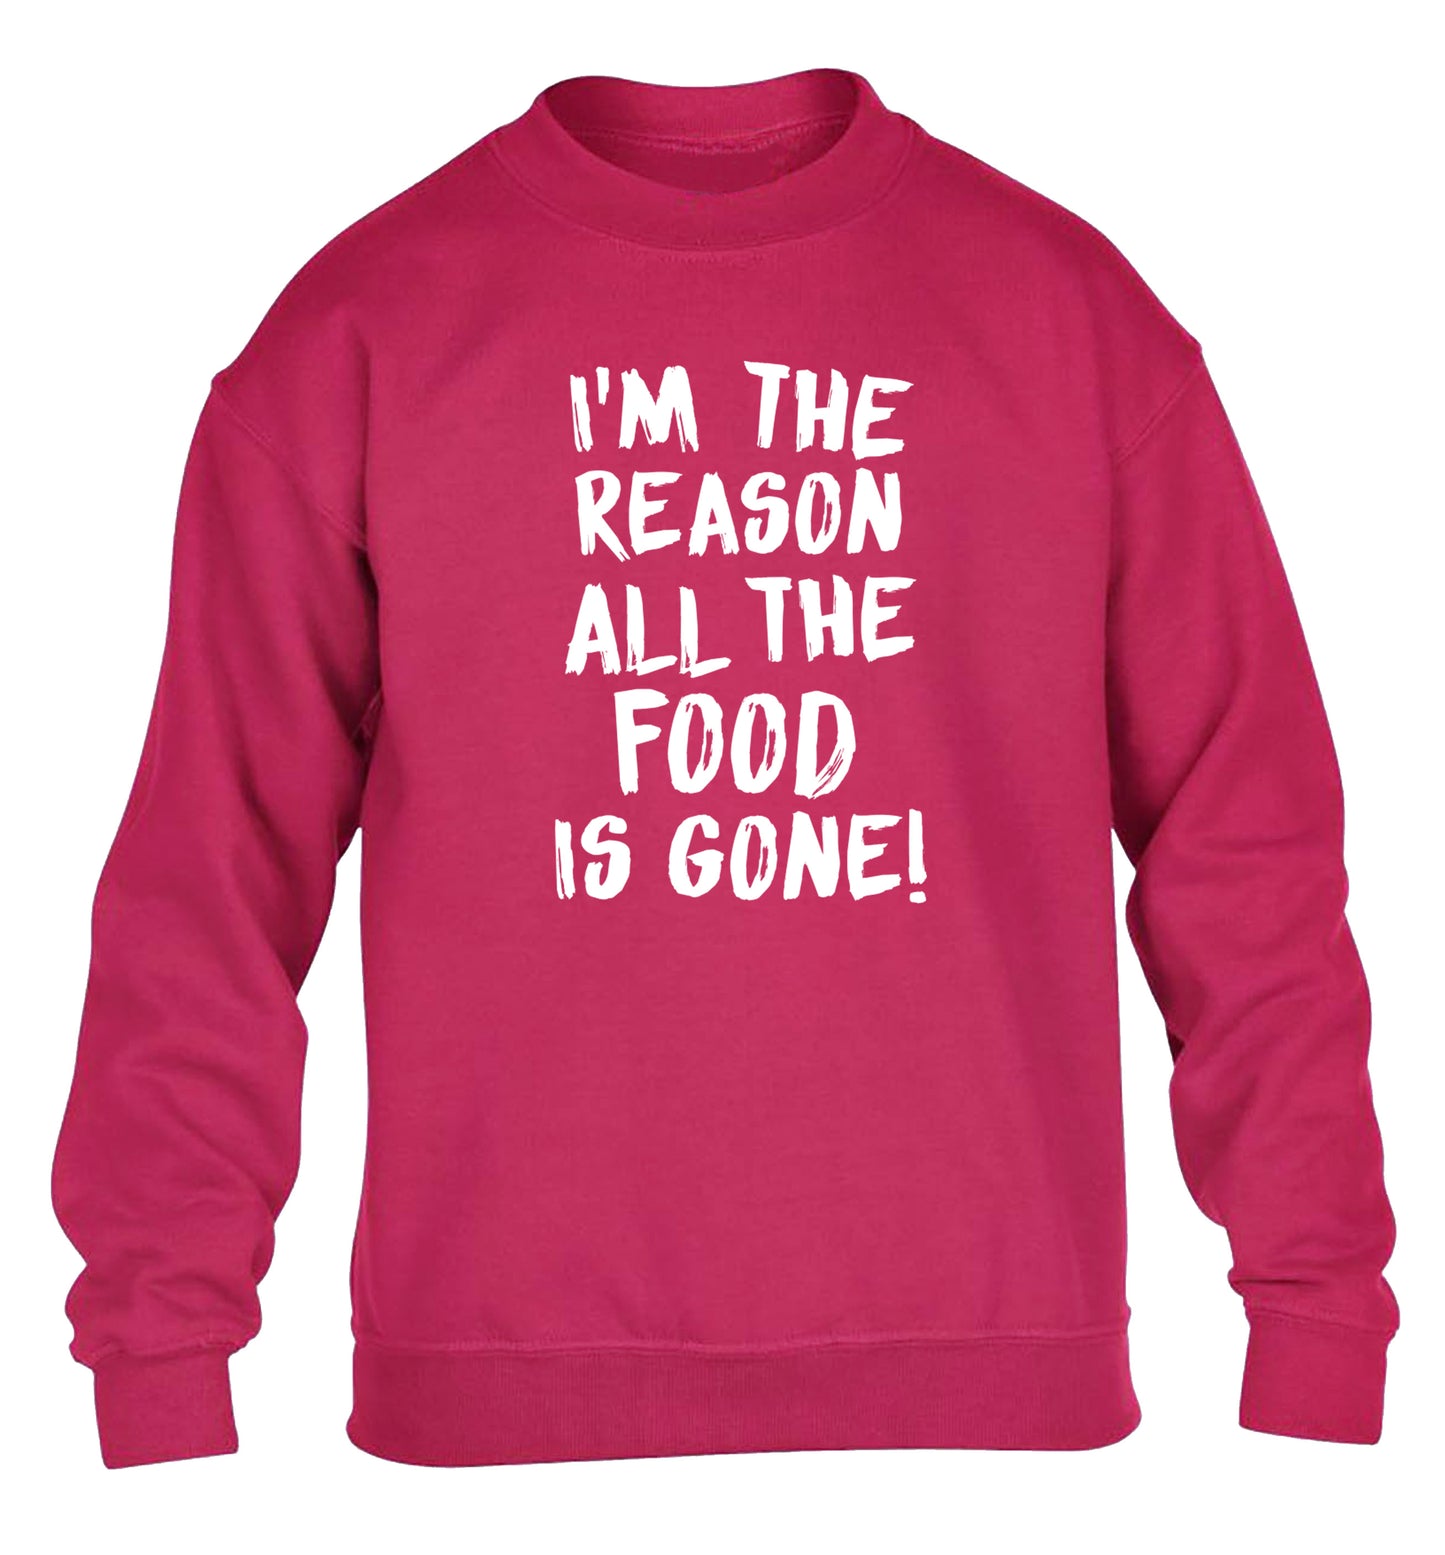 I'm the reason why all the food is gone children's pink sweater 12-13 Years